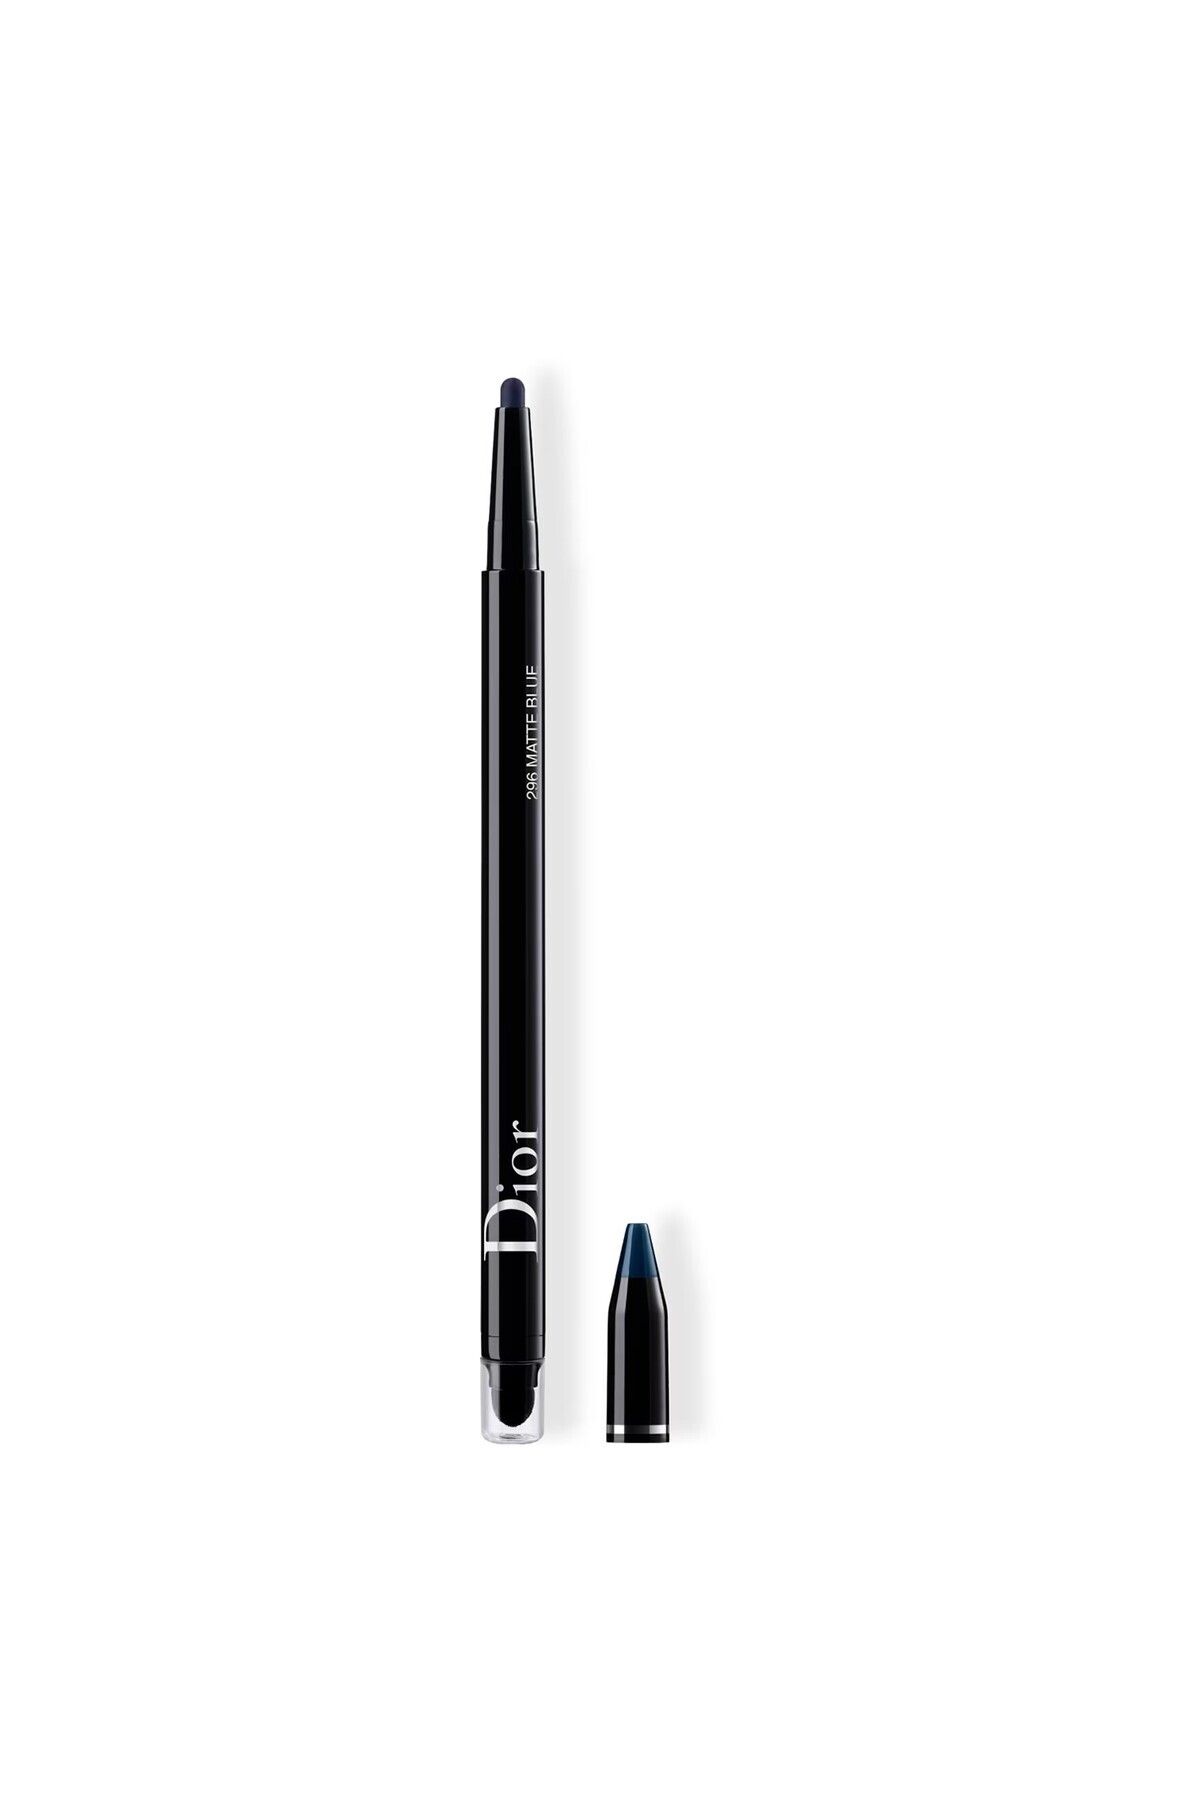 Dior 24H*STYLO WATERPROOF -WEAR-LASTİNG PROTECTİON FOR UP TO 24 HOURS,MATTE EYELİNER PSSN1961